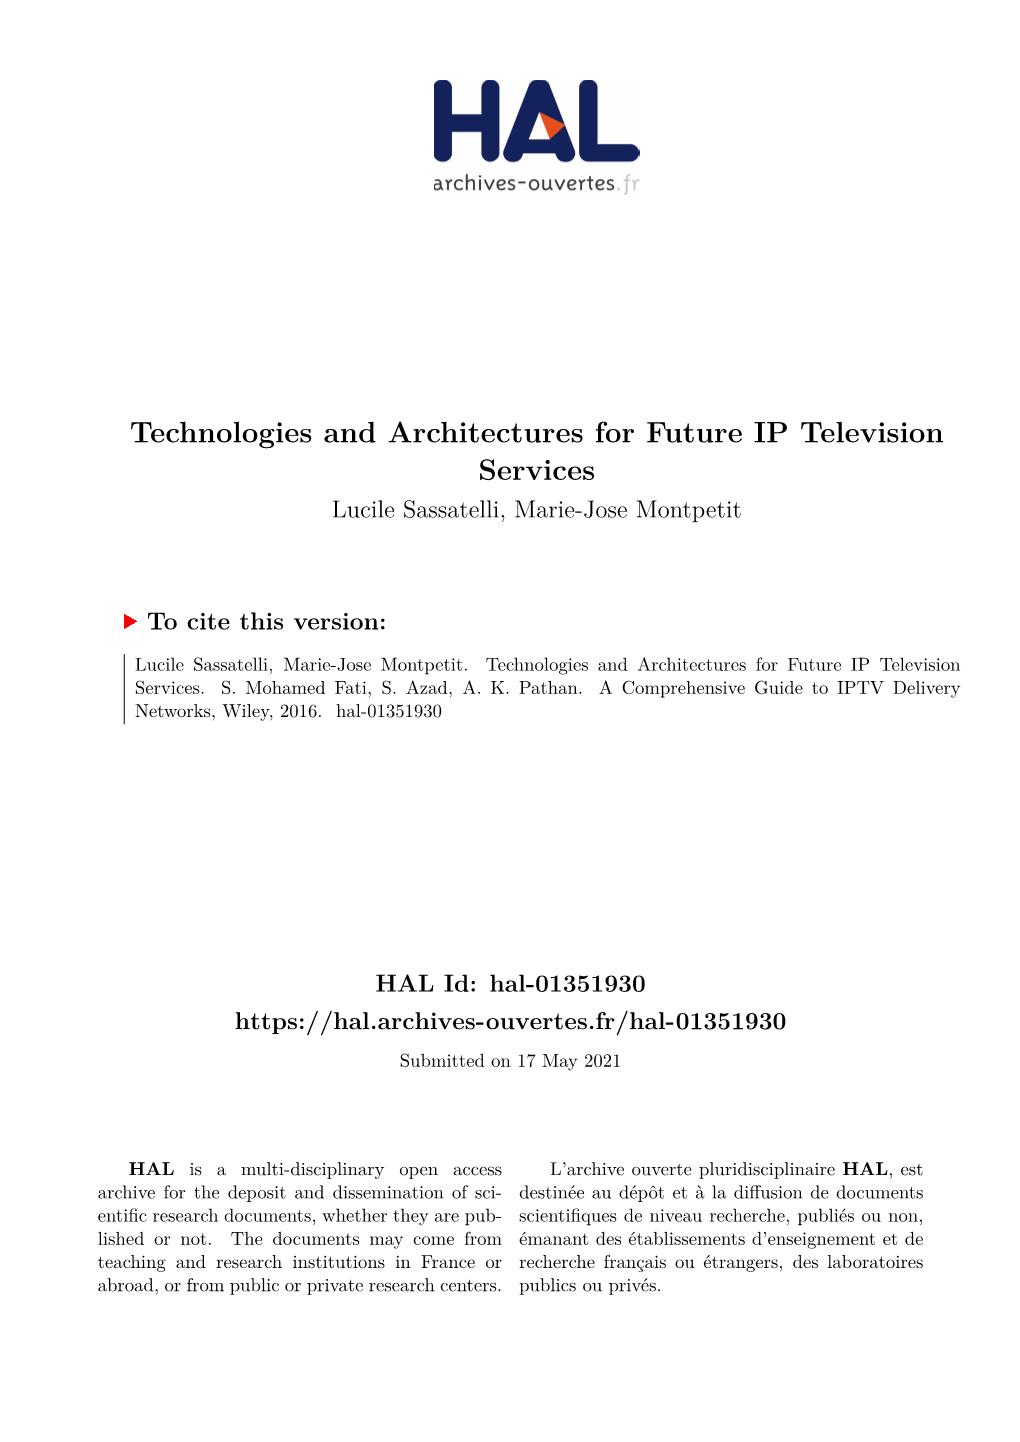 Technologies and Architectures for Future IP Television Services Lucile Sassatelli, Marie-Jose Montpetit